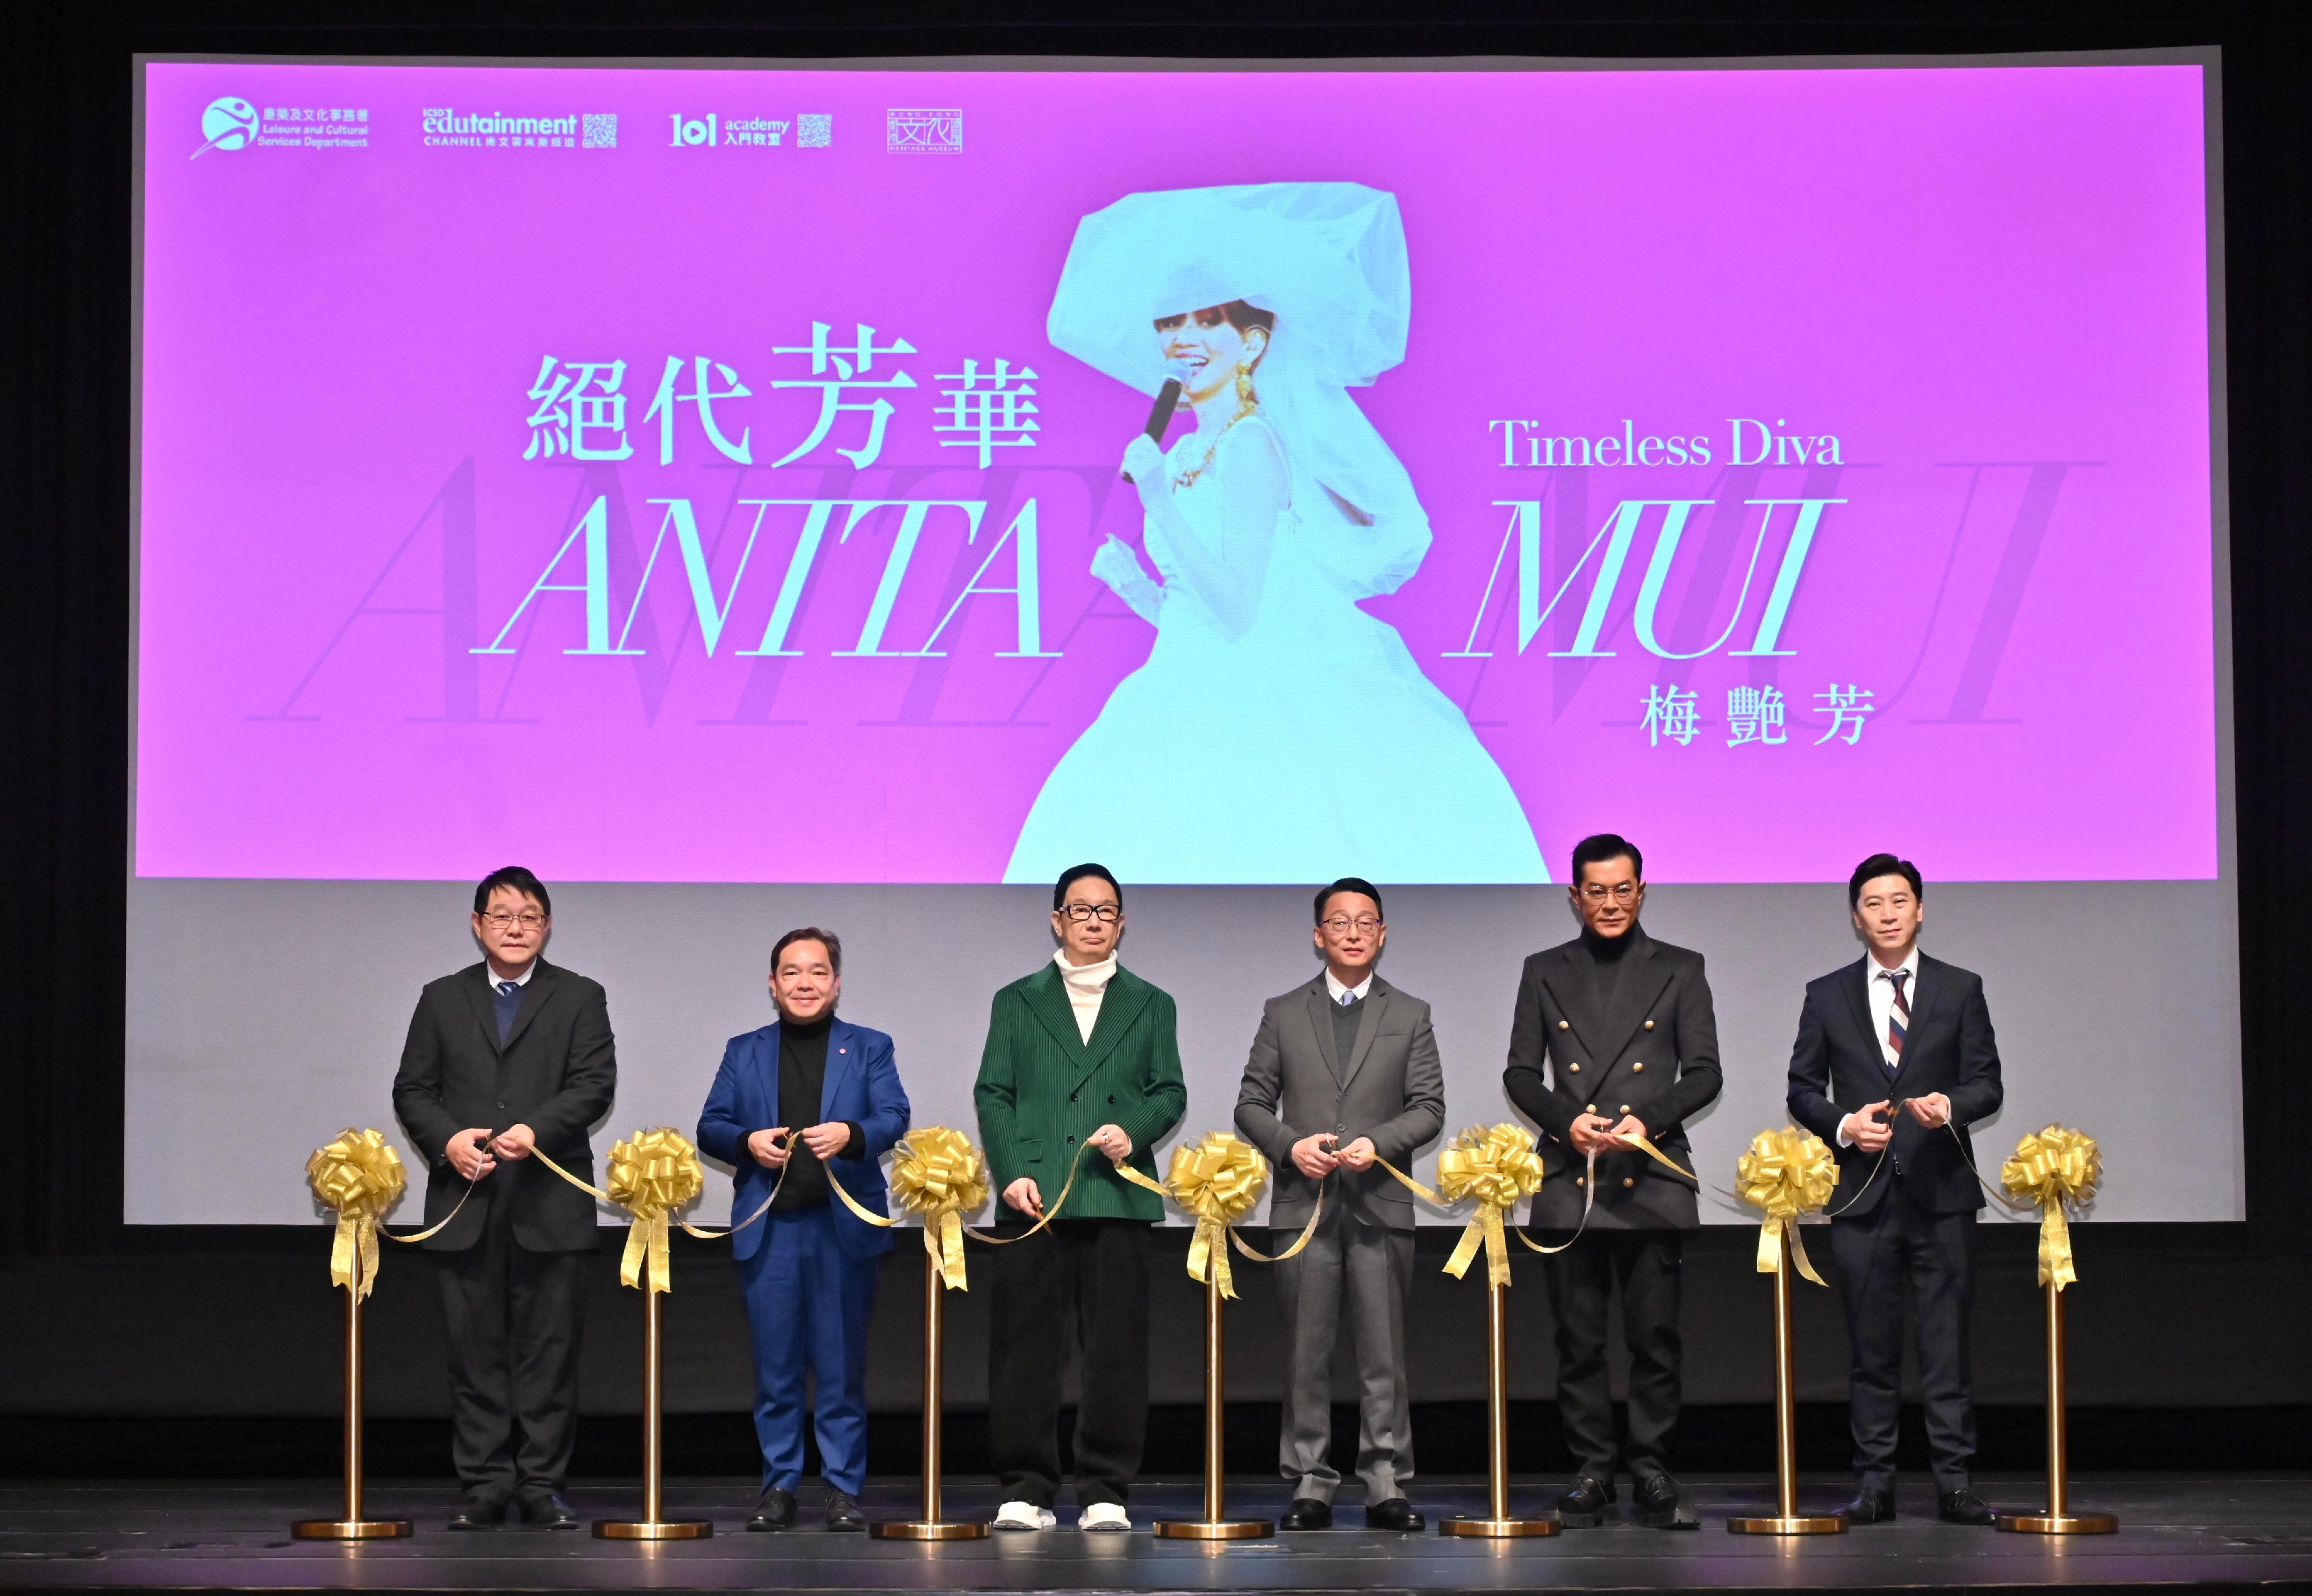 The opening ceremony for the "Timeless Diva: Anita Mui" exhibition was held today (December 23) at the Hong Kong Heritage Museum (HKHM). Photo shows the officiating guests (from left) the Museum Director of the HKHM, Mr Brian Lam; the Chairperson of the History Sub-committee of the Museum Advisory Committee, Professor Joshua Mok; a close friend of Anita Mui and fashion and image designer, Mr Eddie Lau; the Director of Leisure and Cultural Services, Mr Vincent Liu; the President of the Hong Kong Performing Artistes Guild, Mr Louis Koo; and the Chairperson of the Art Form Sub-committee (Music) of the Programme and Development Committee, Professor Johnny Poon, at the ceremony.